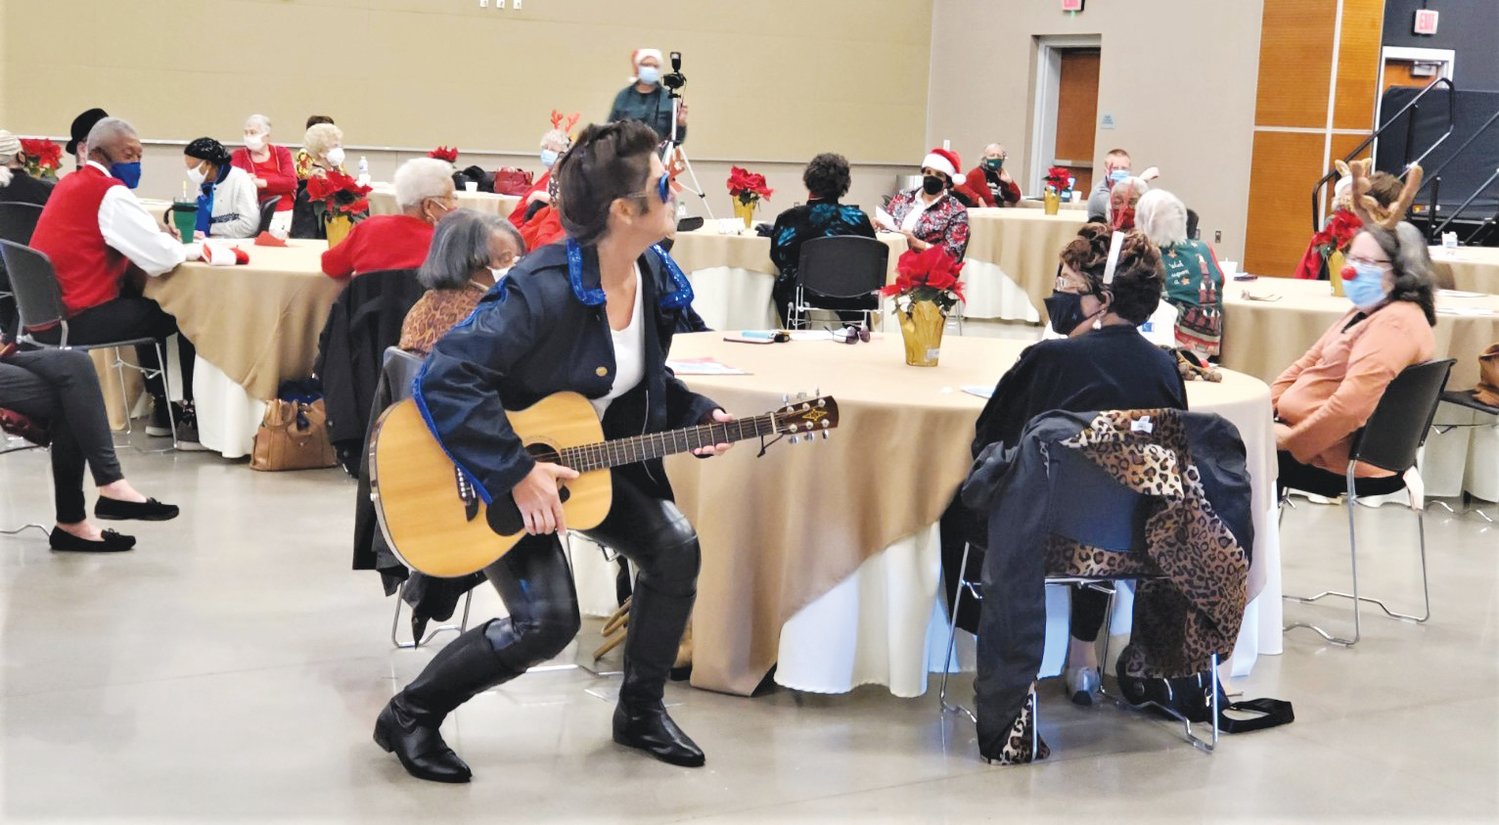 Jackie Green plays Elvis at the Council on Aging's holiday party.